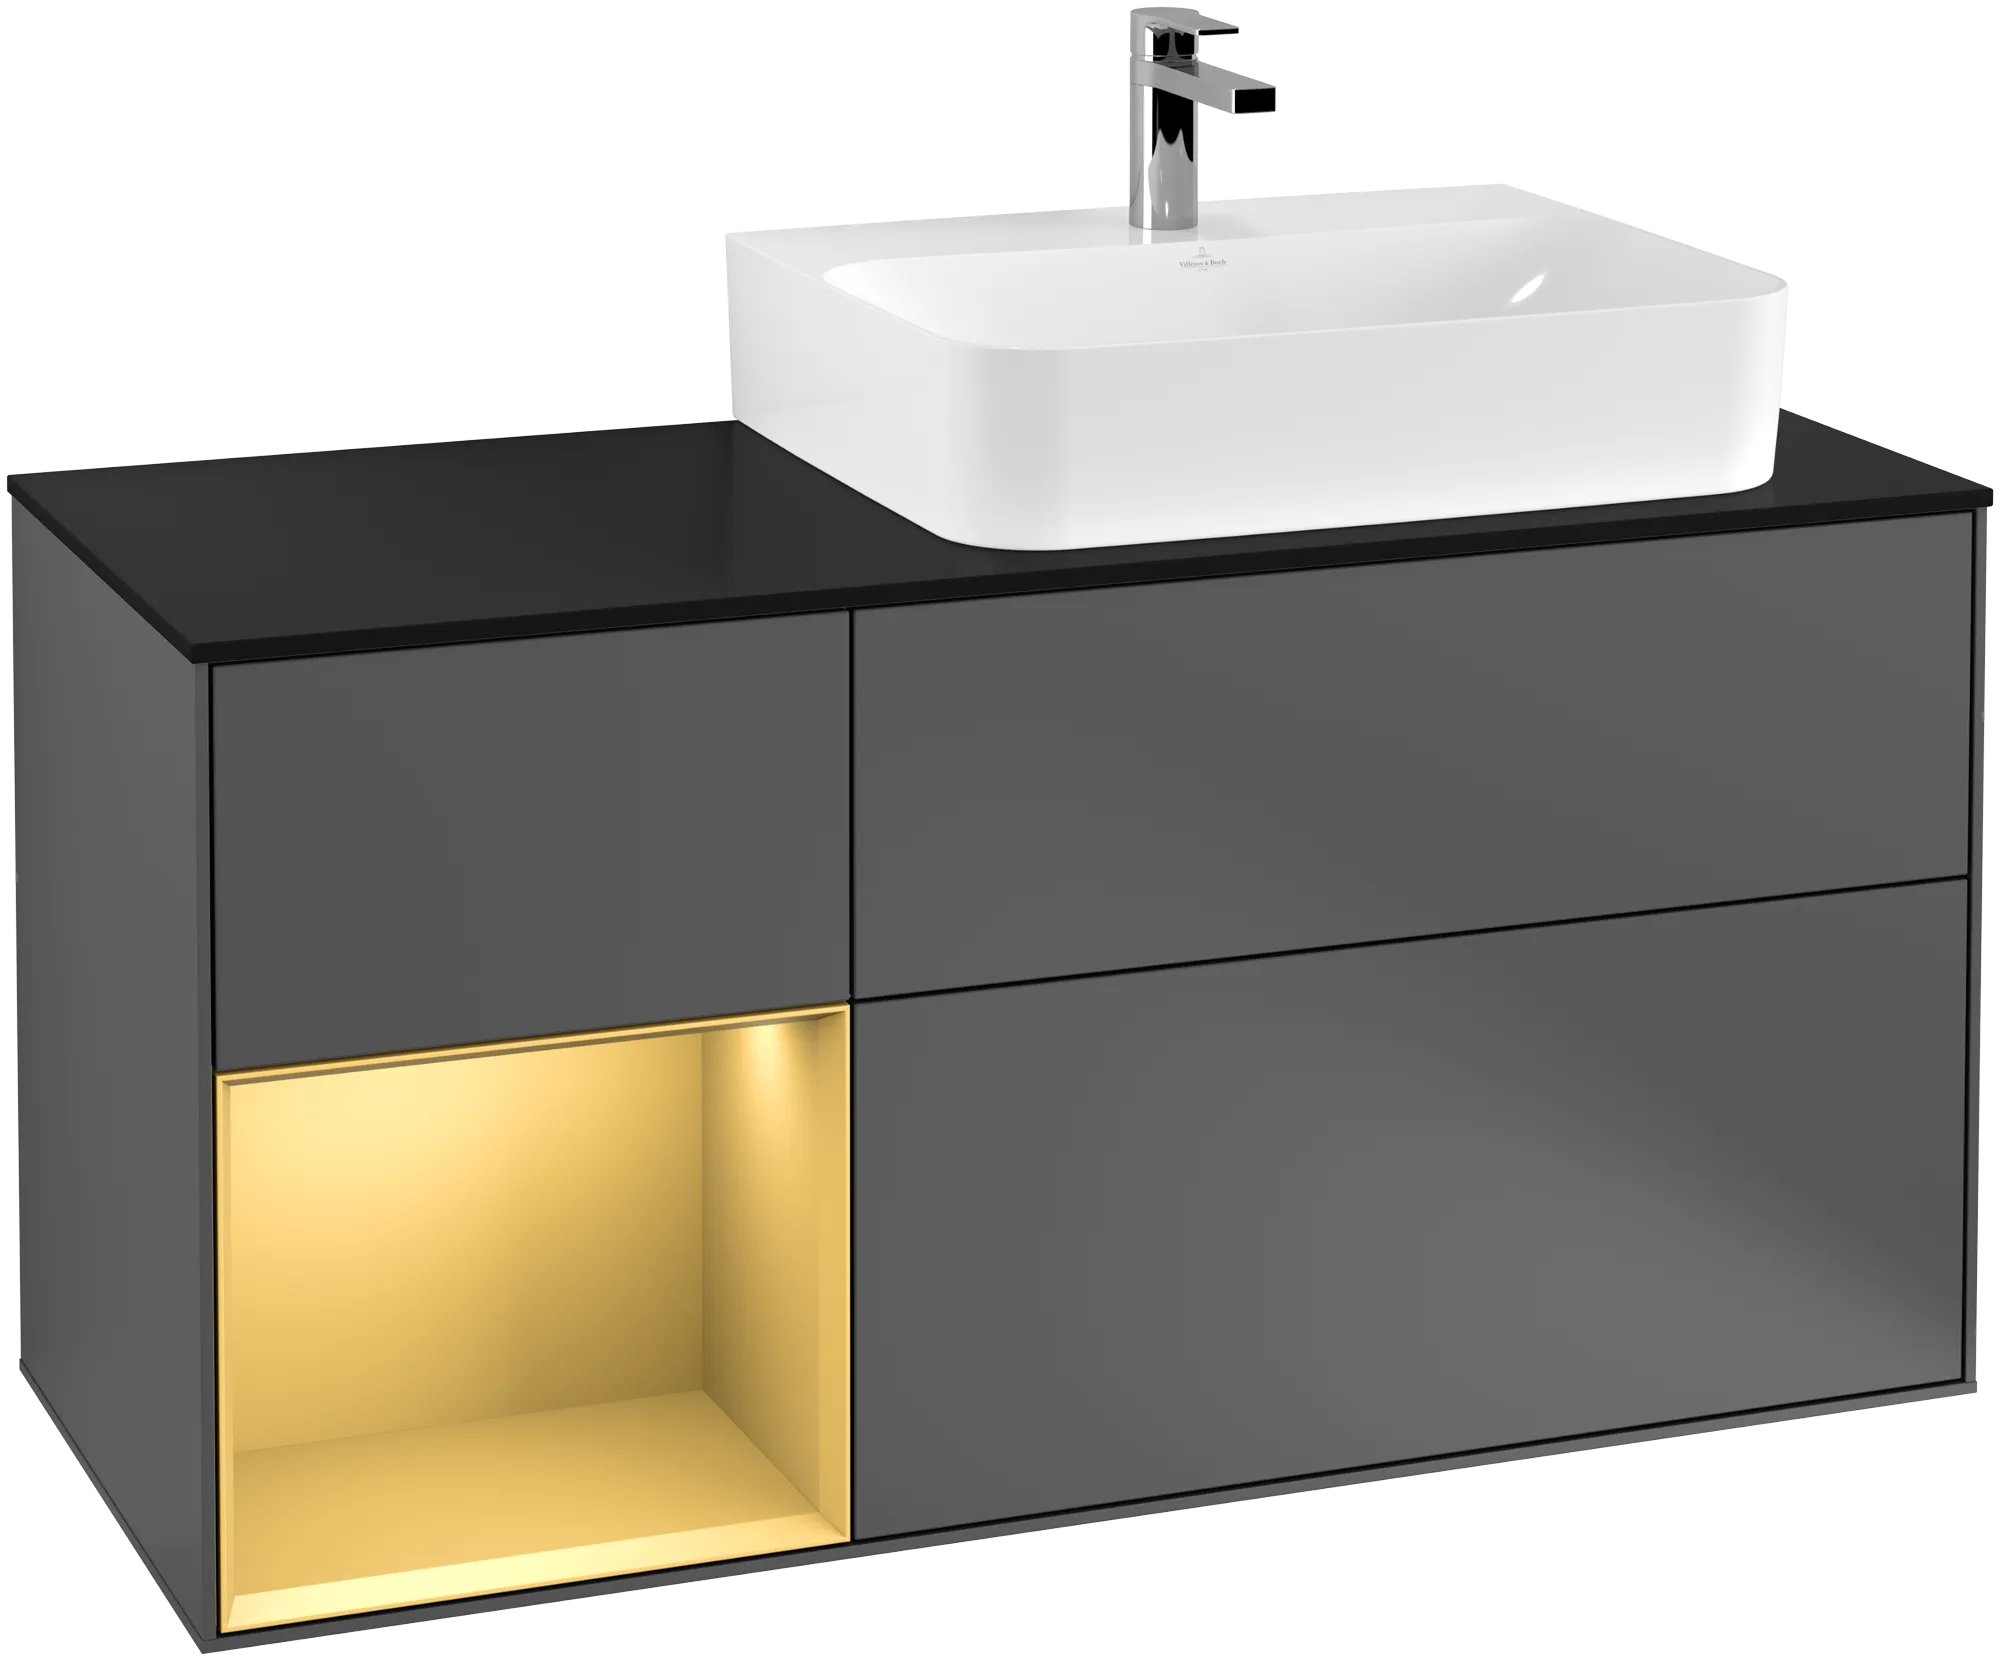 Picture of VILLEROY BOCH Finion Vanity unit, with lighting, 3 pull-out compartments, 1200 x 603 x 501 mm, Anthracite Matt Lacquer / Gold Matt Lacquer / Glass Black Matt #G142HFGK